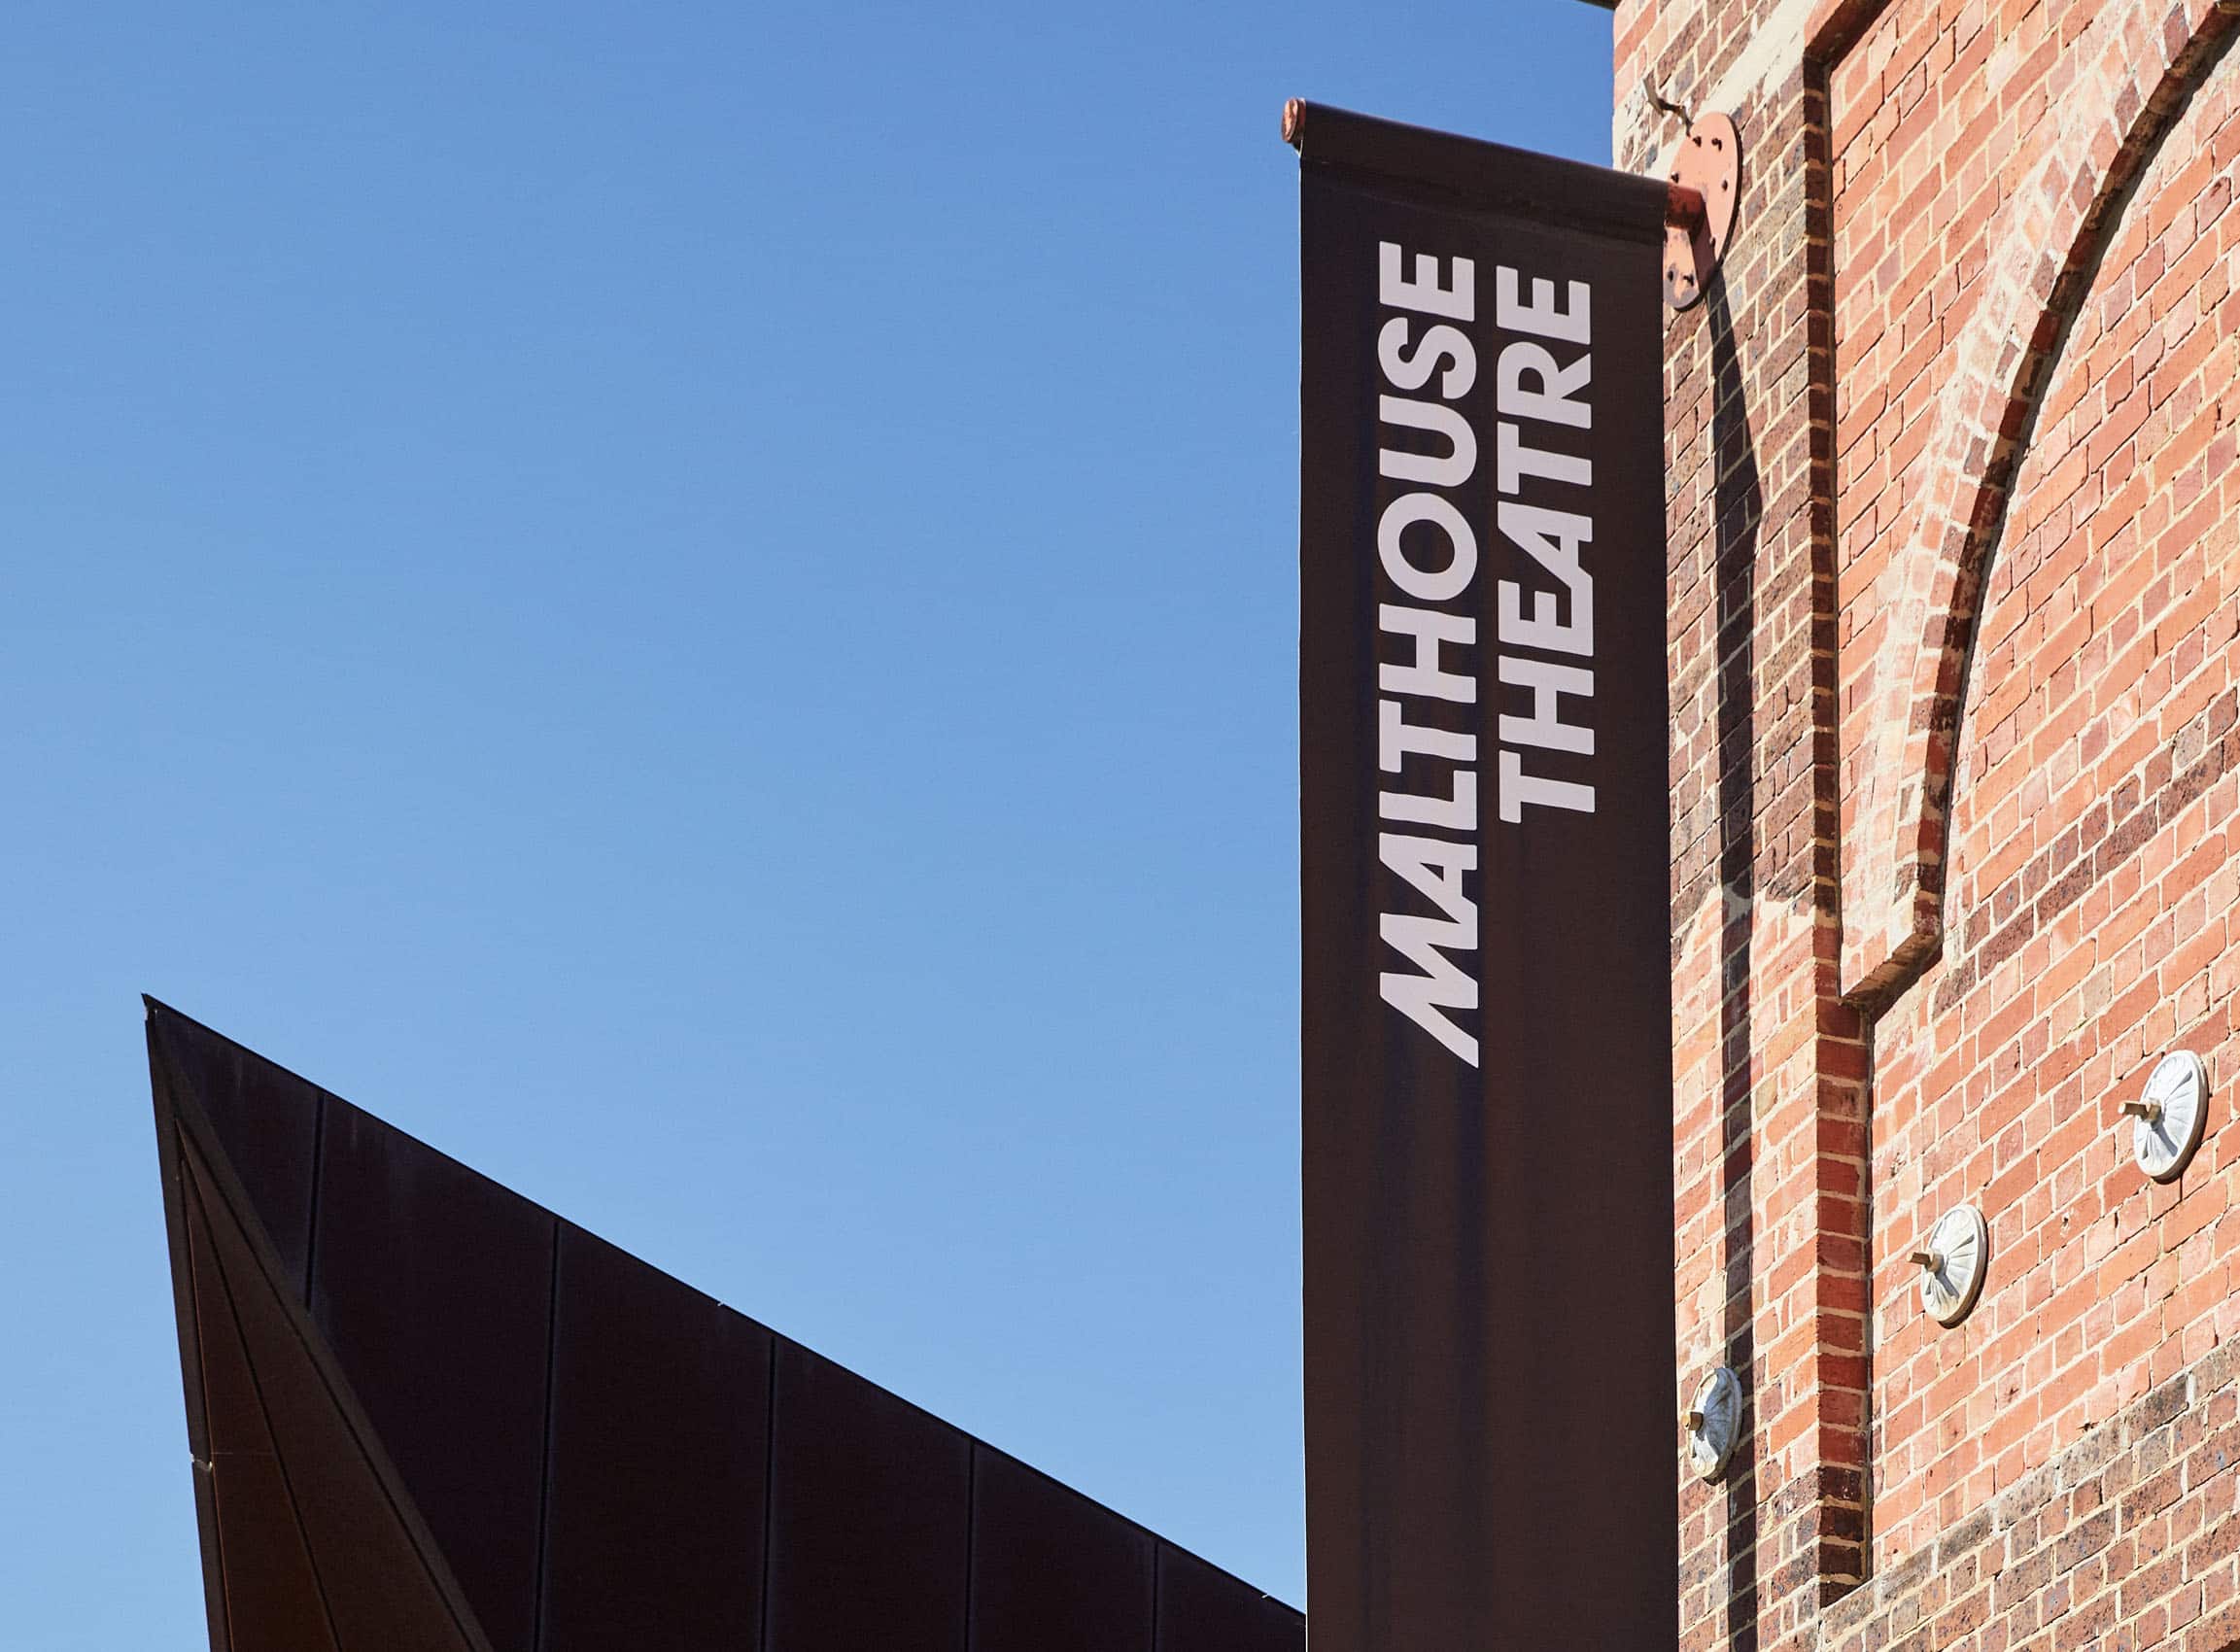 The Alba is close to Melbourne’s famed arts and culture precincts.